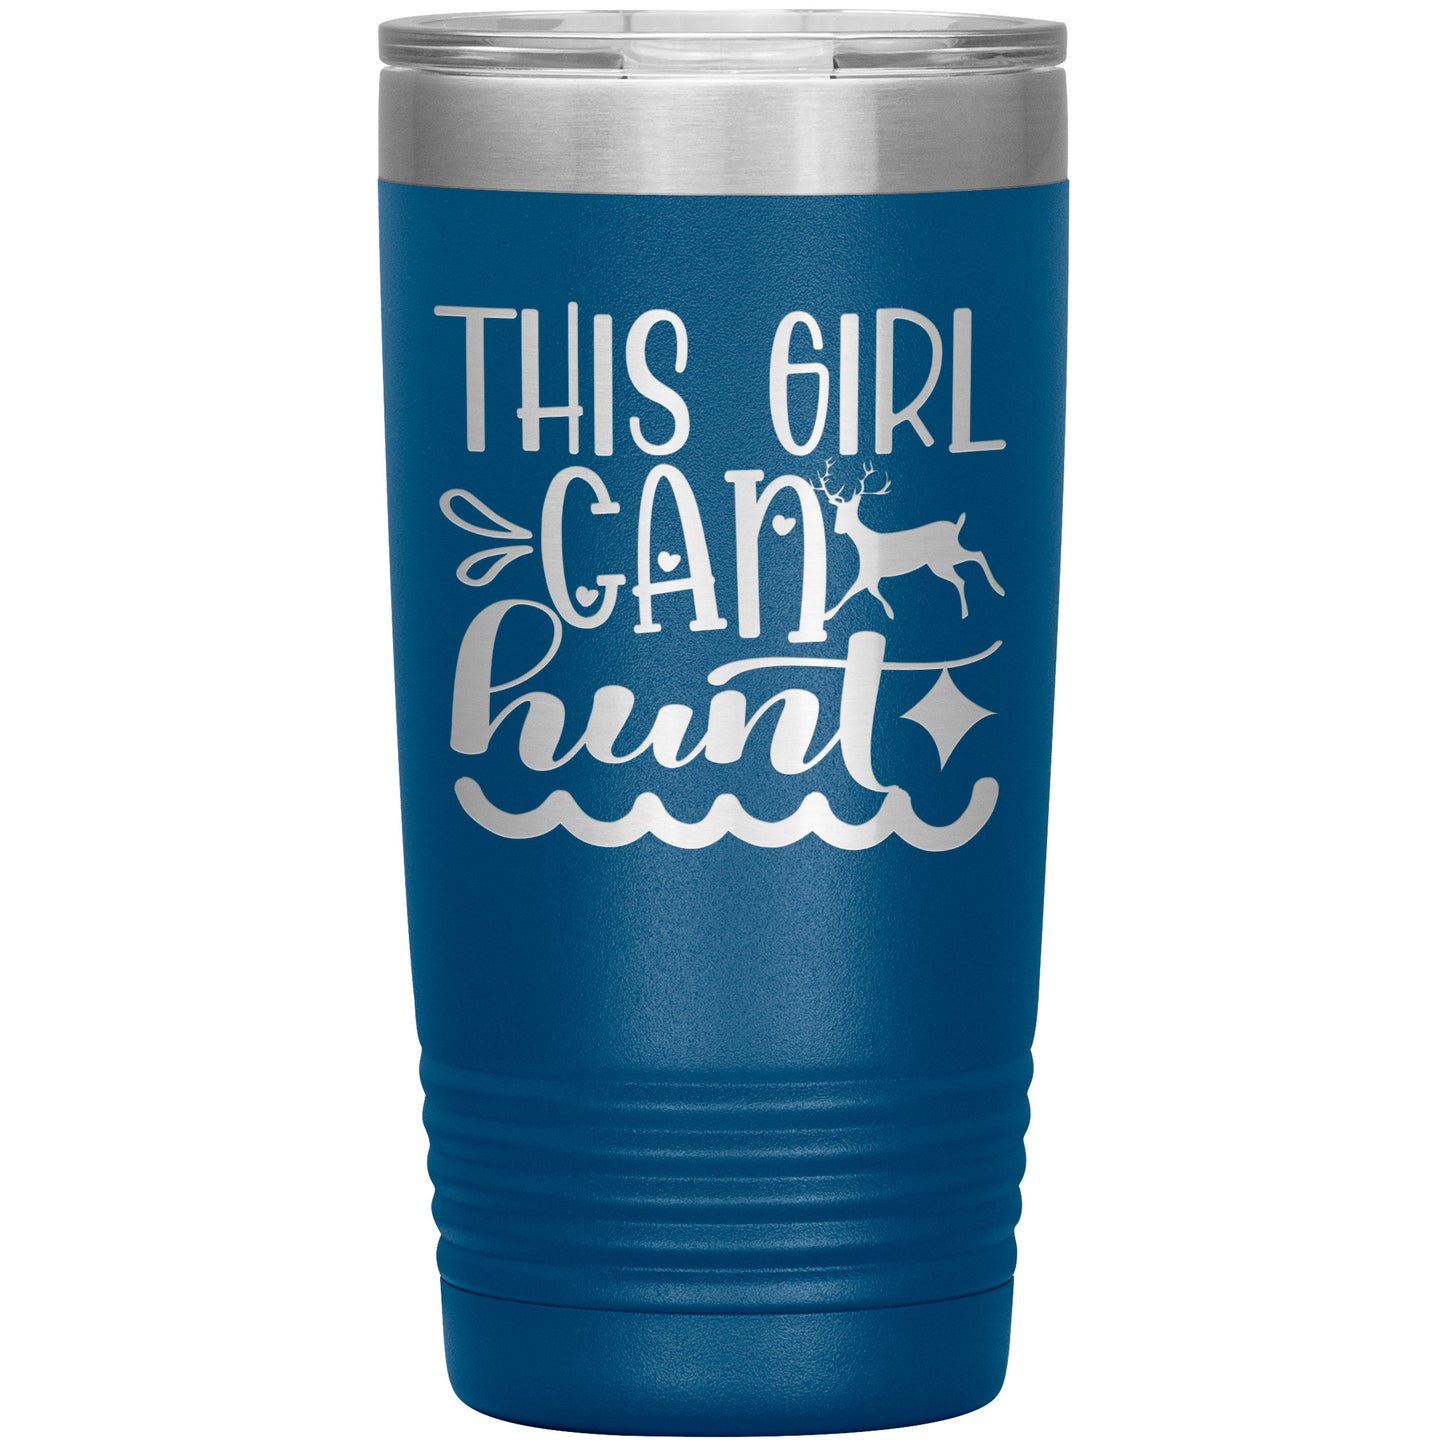 A This Girl Can Hunt - Laser Etched Tumbler - 20oz with a silver rim and lid, featuring the white text "this girl can hunt" with decorative elements like antlers and waves.